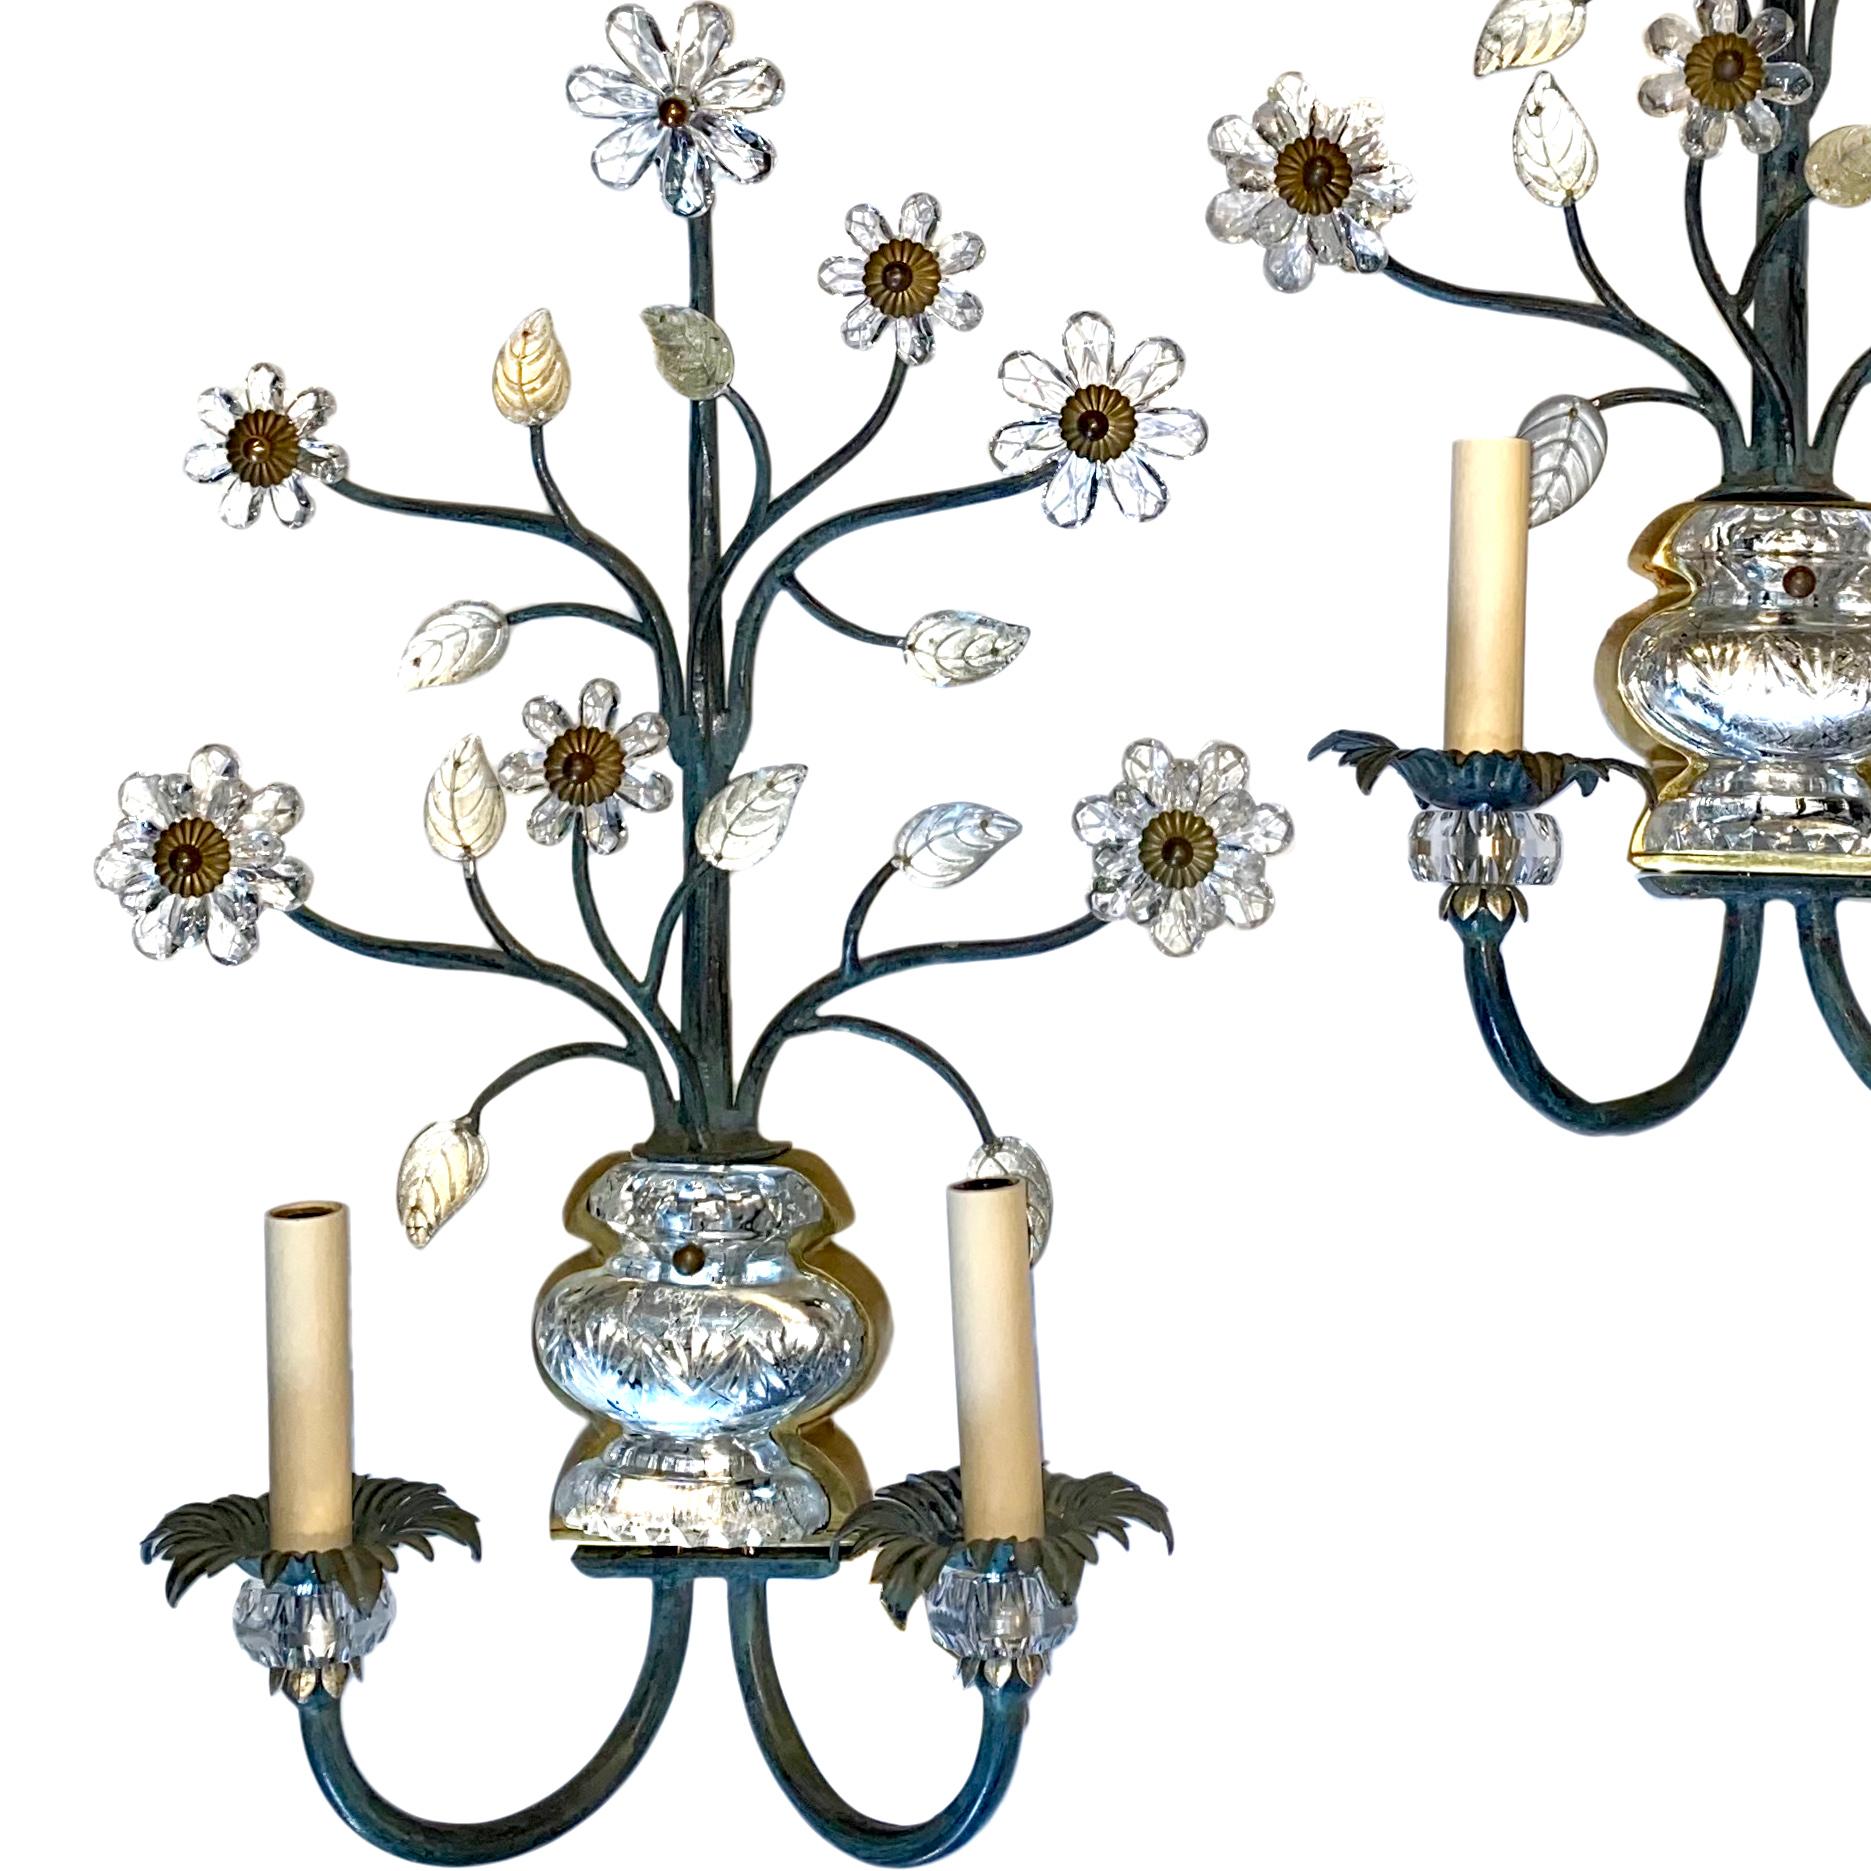 A pair of French circa 1940s painted metal double-light sconces with molded glass body and floral details.

Measurements:
Height 22